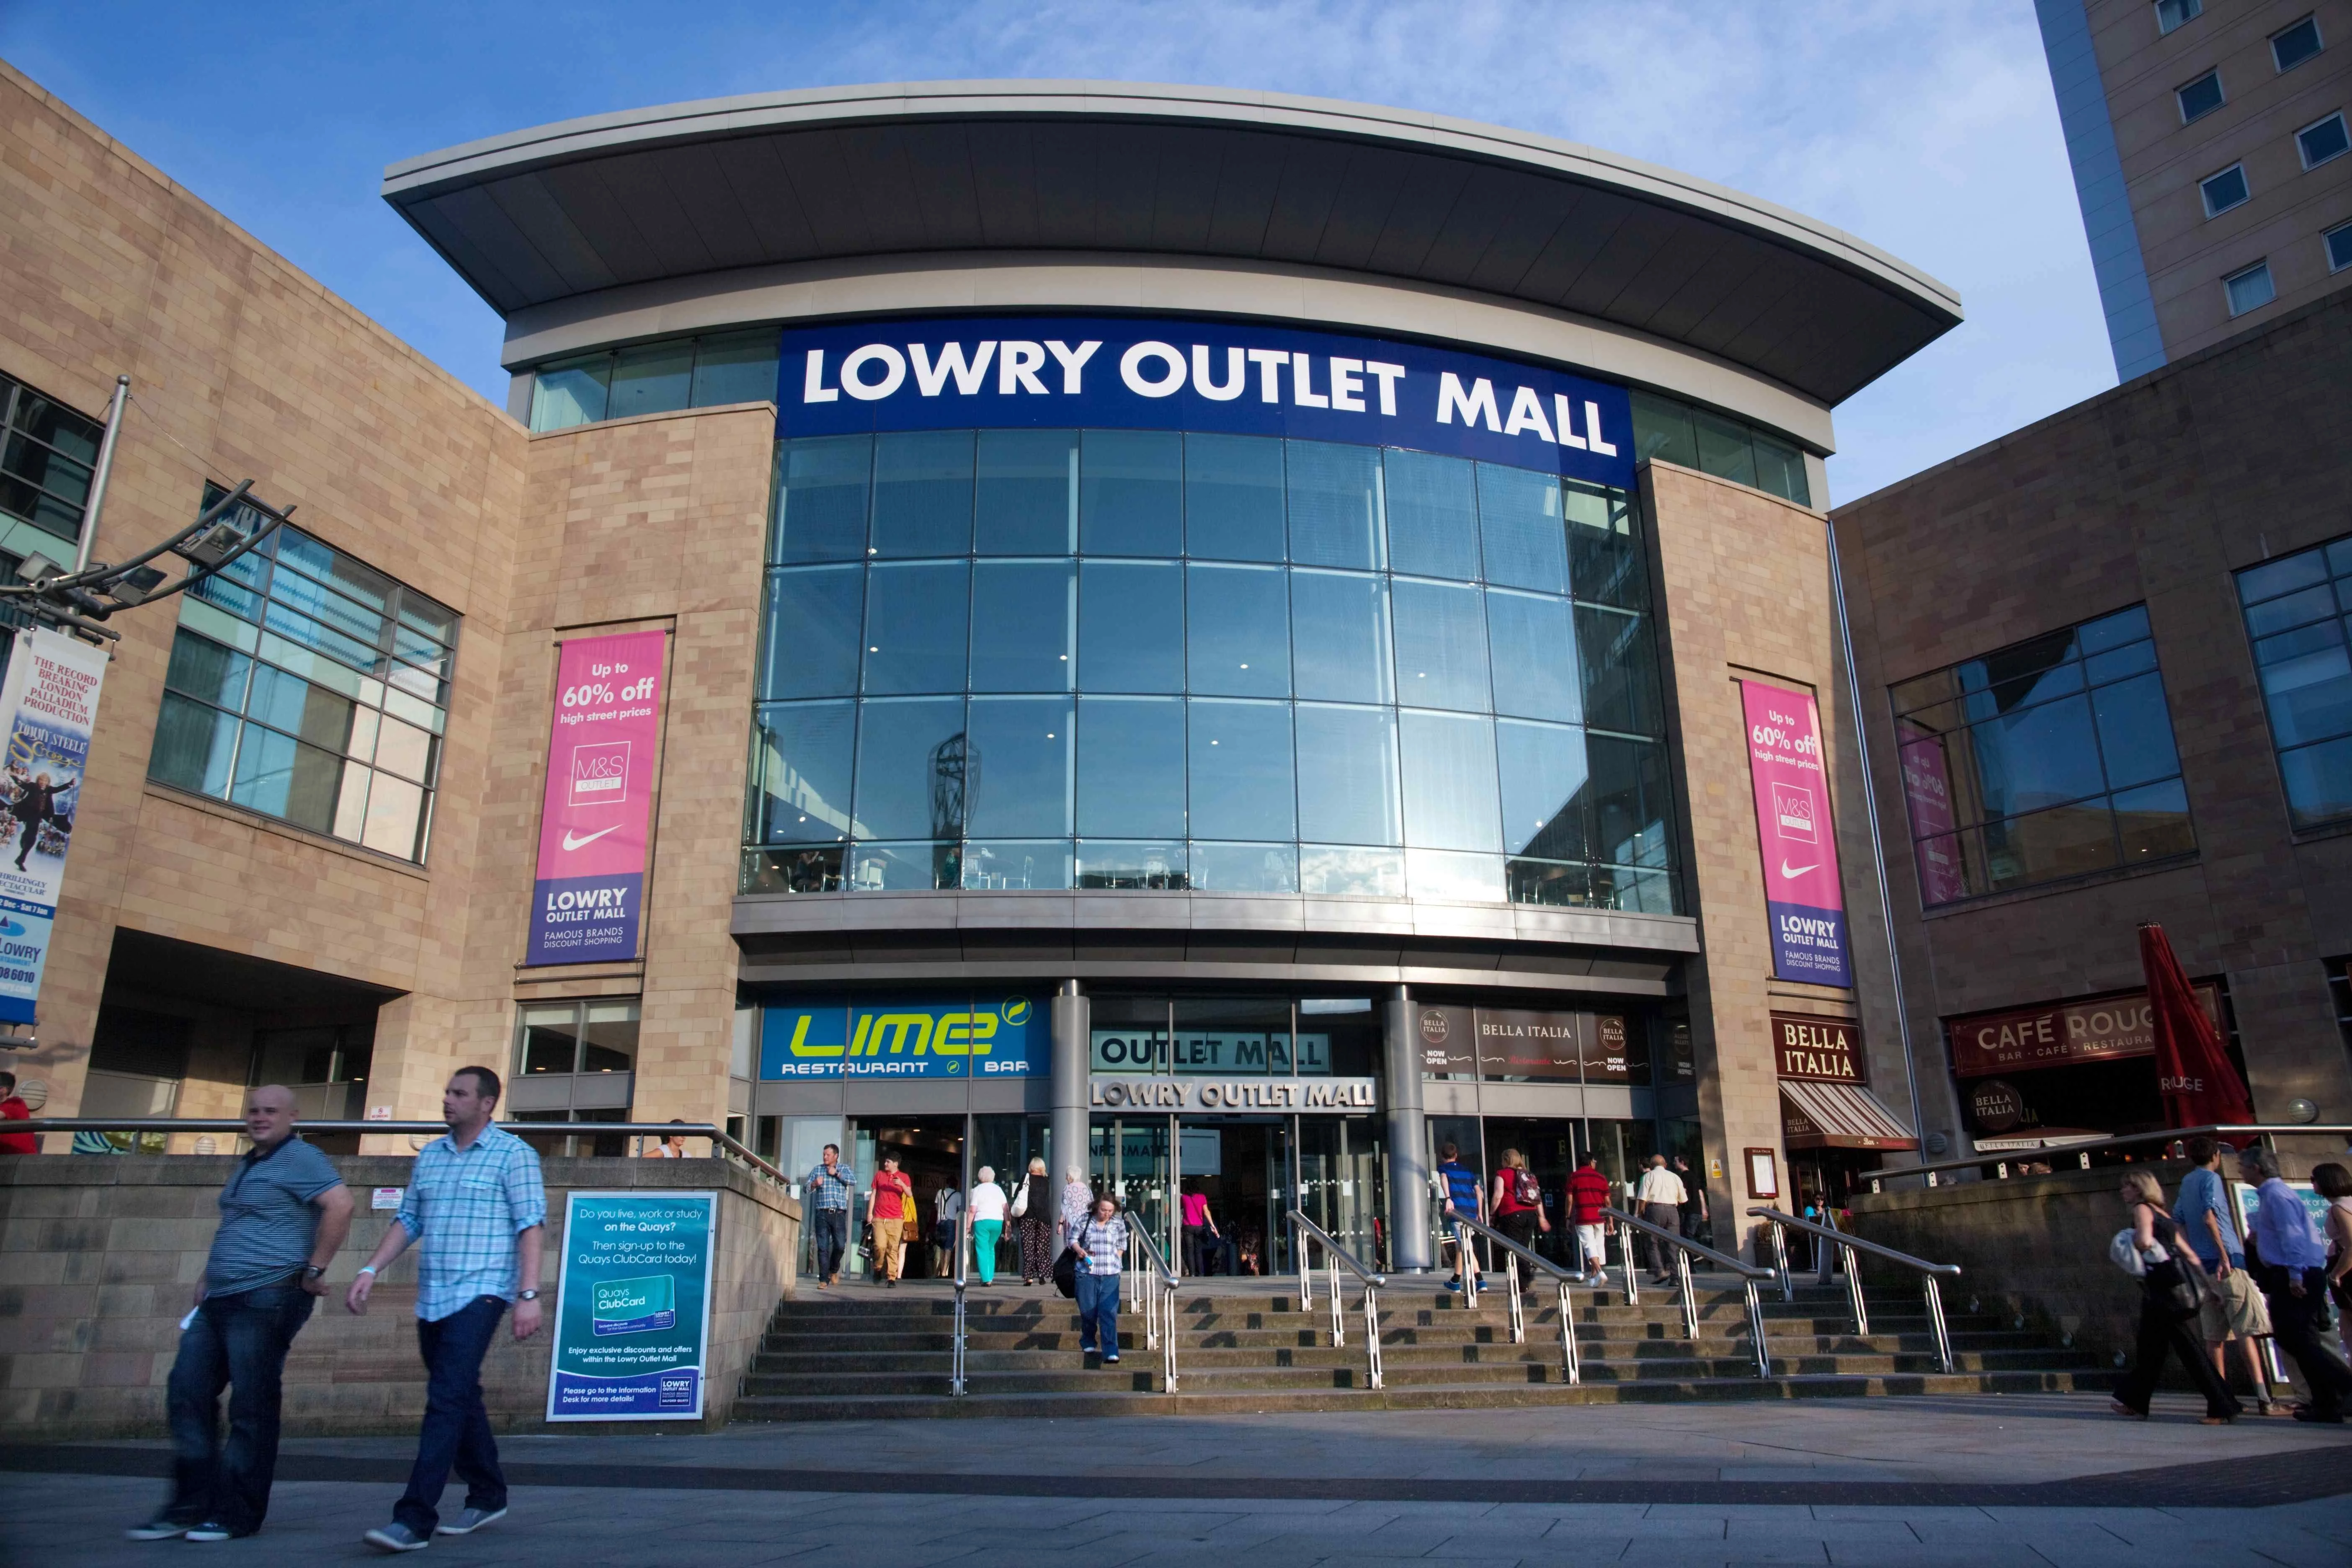 Lowry Outlet